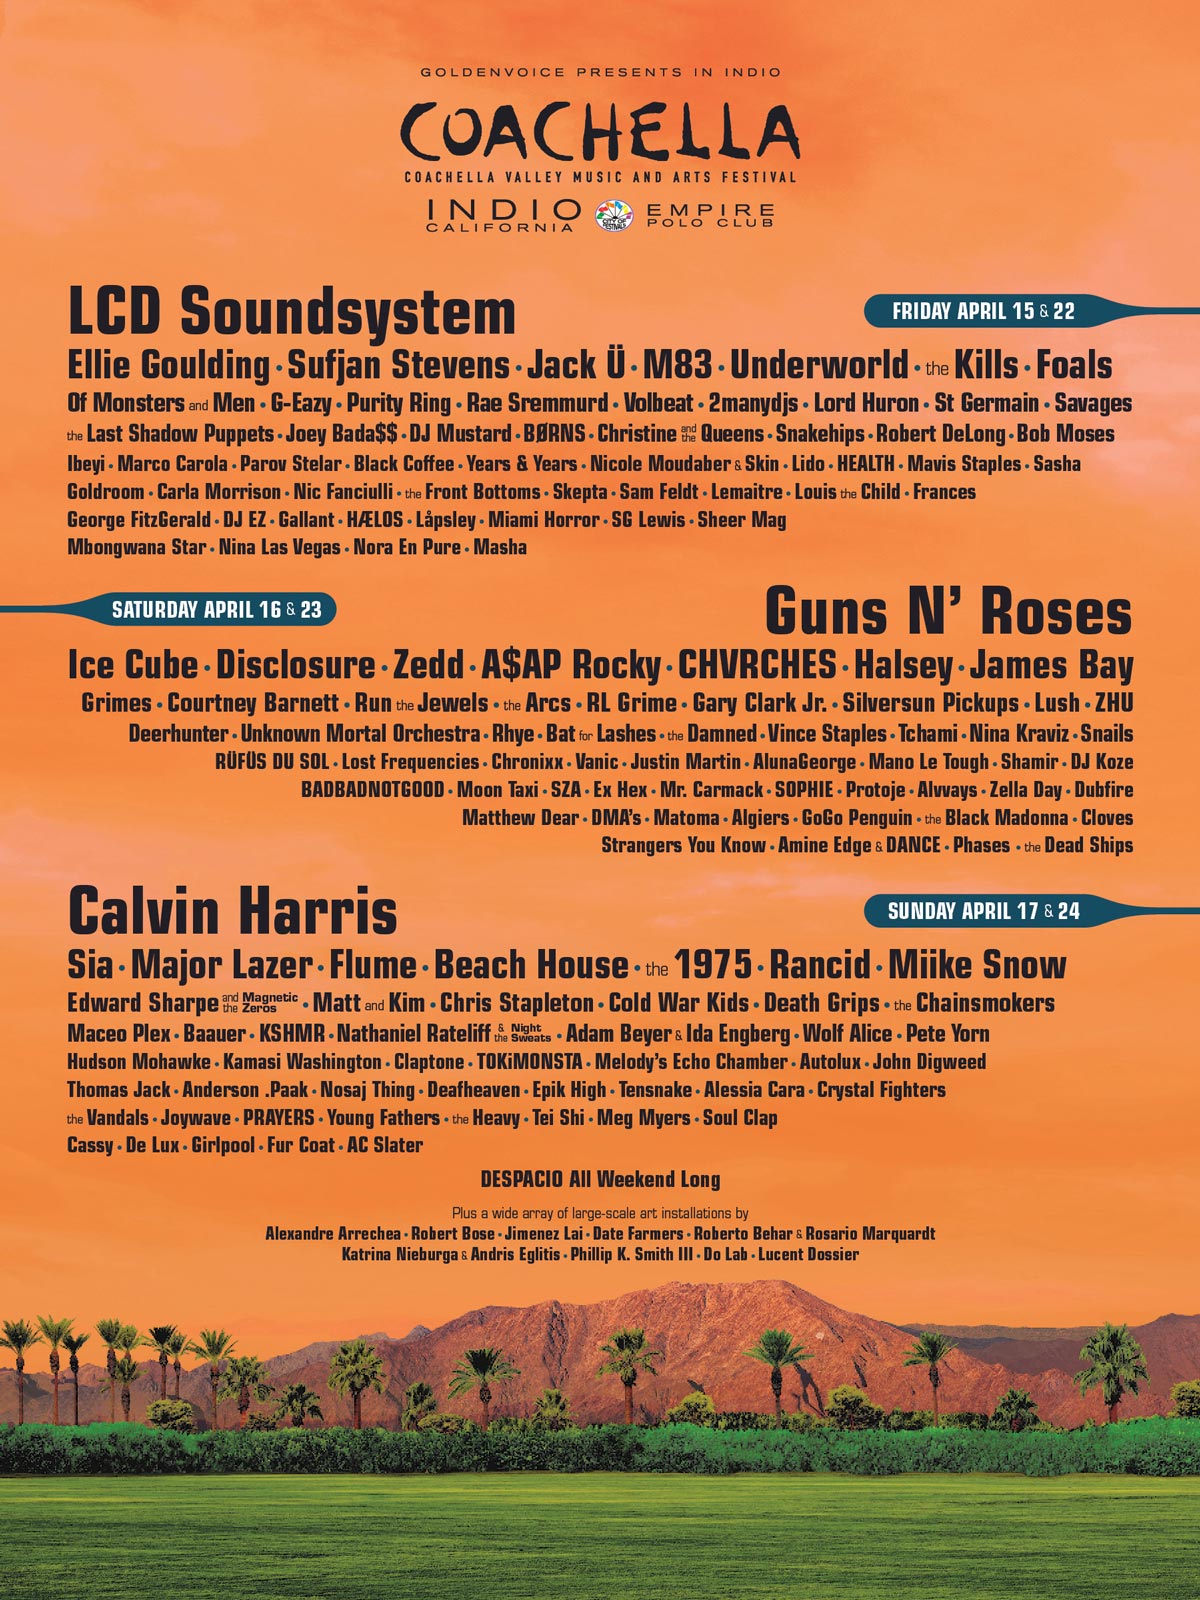 Coachella 2016 Lineup Announced, Selling Out Fast